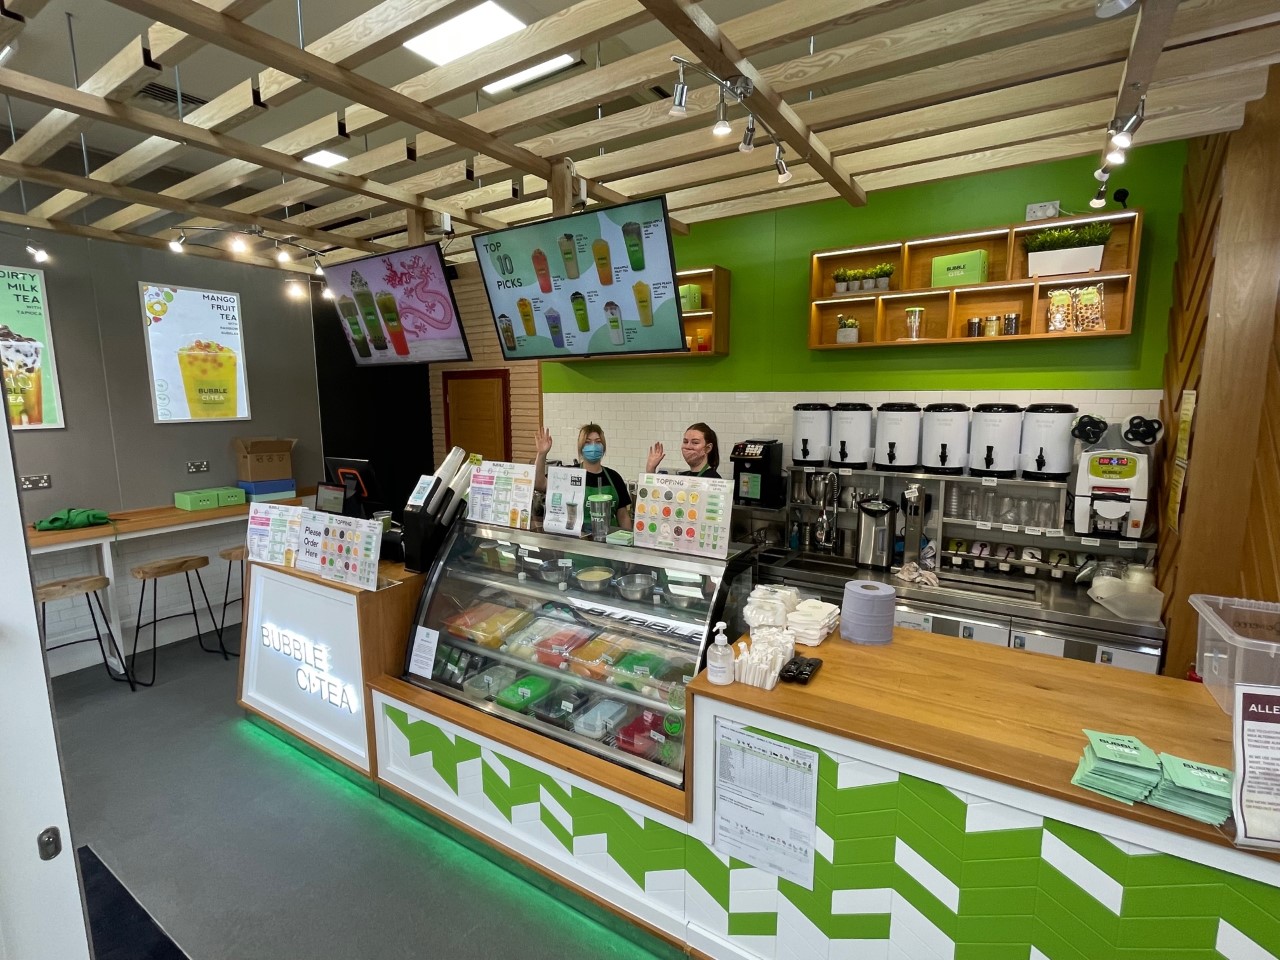 The interior of Bubble CiTea at Southgate Bath, with two people waving from behind the counter.